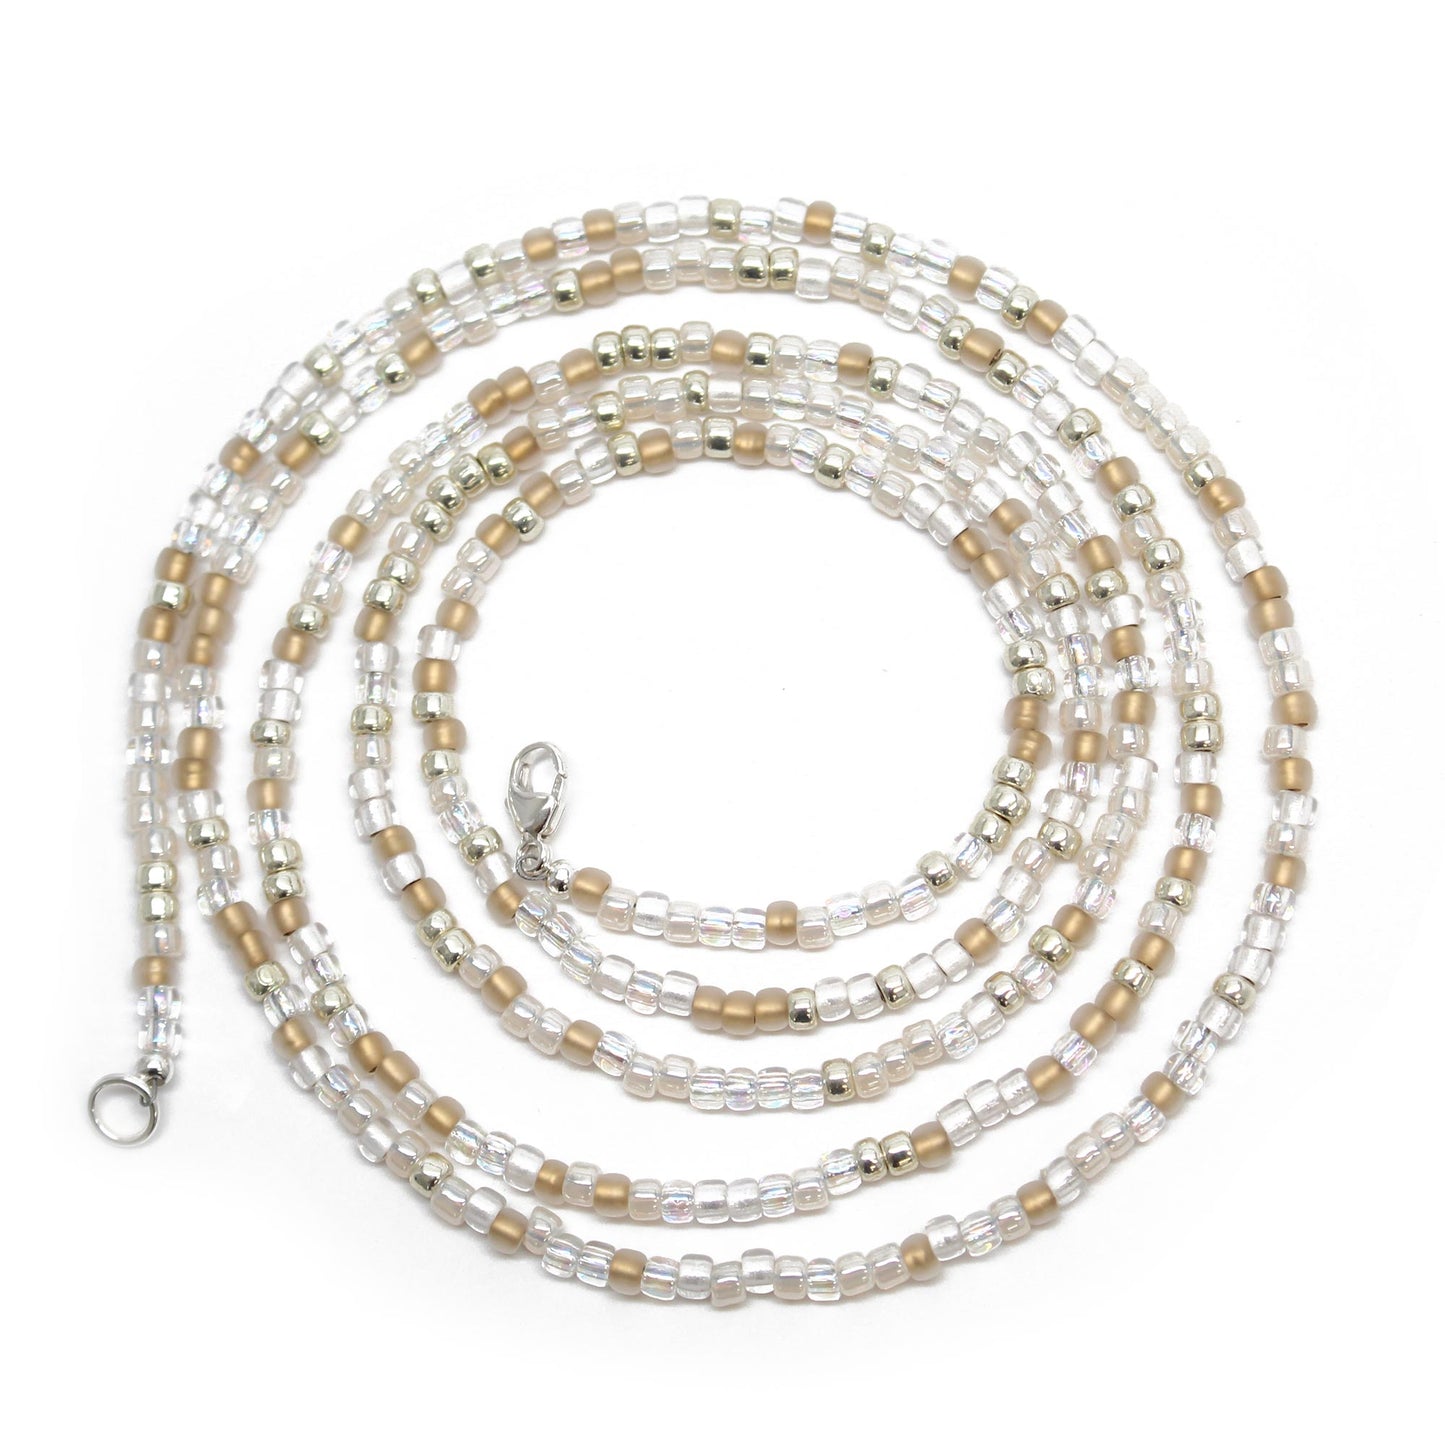 Gold Silver White Seed Bead Necklace